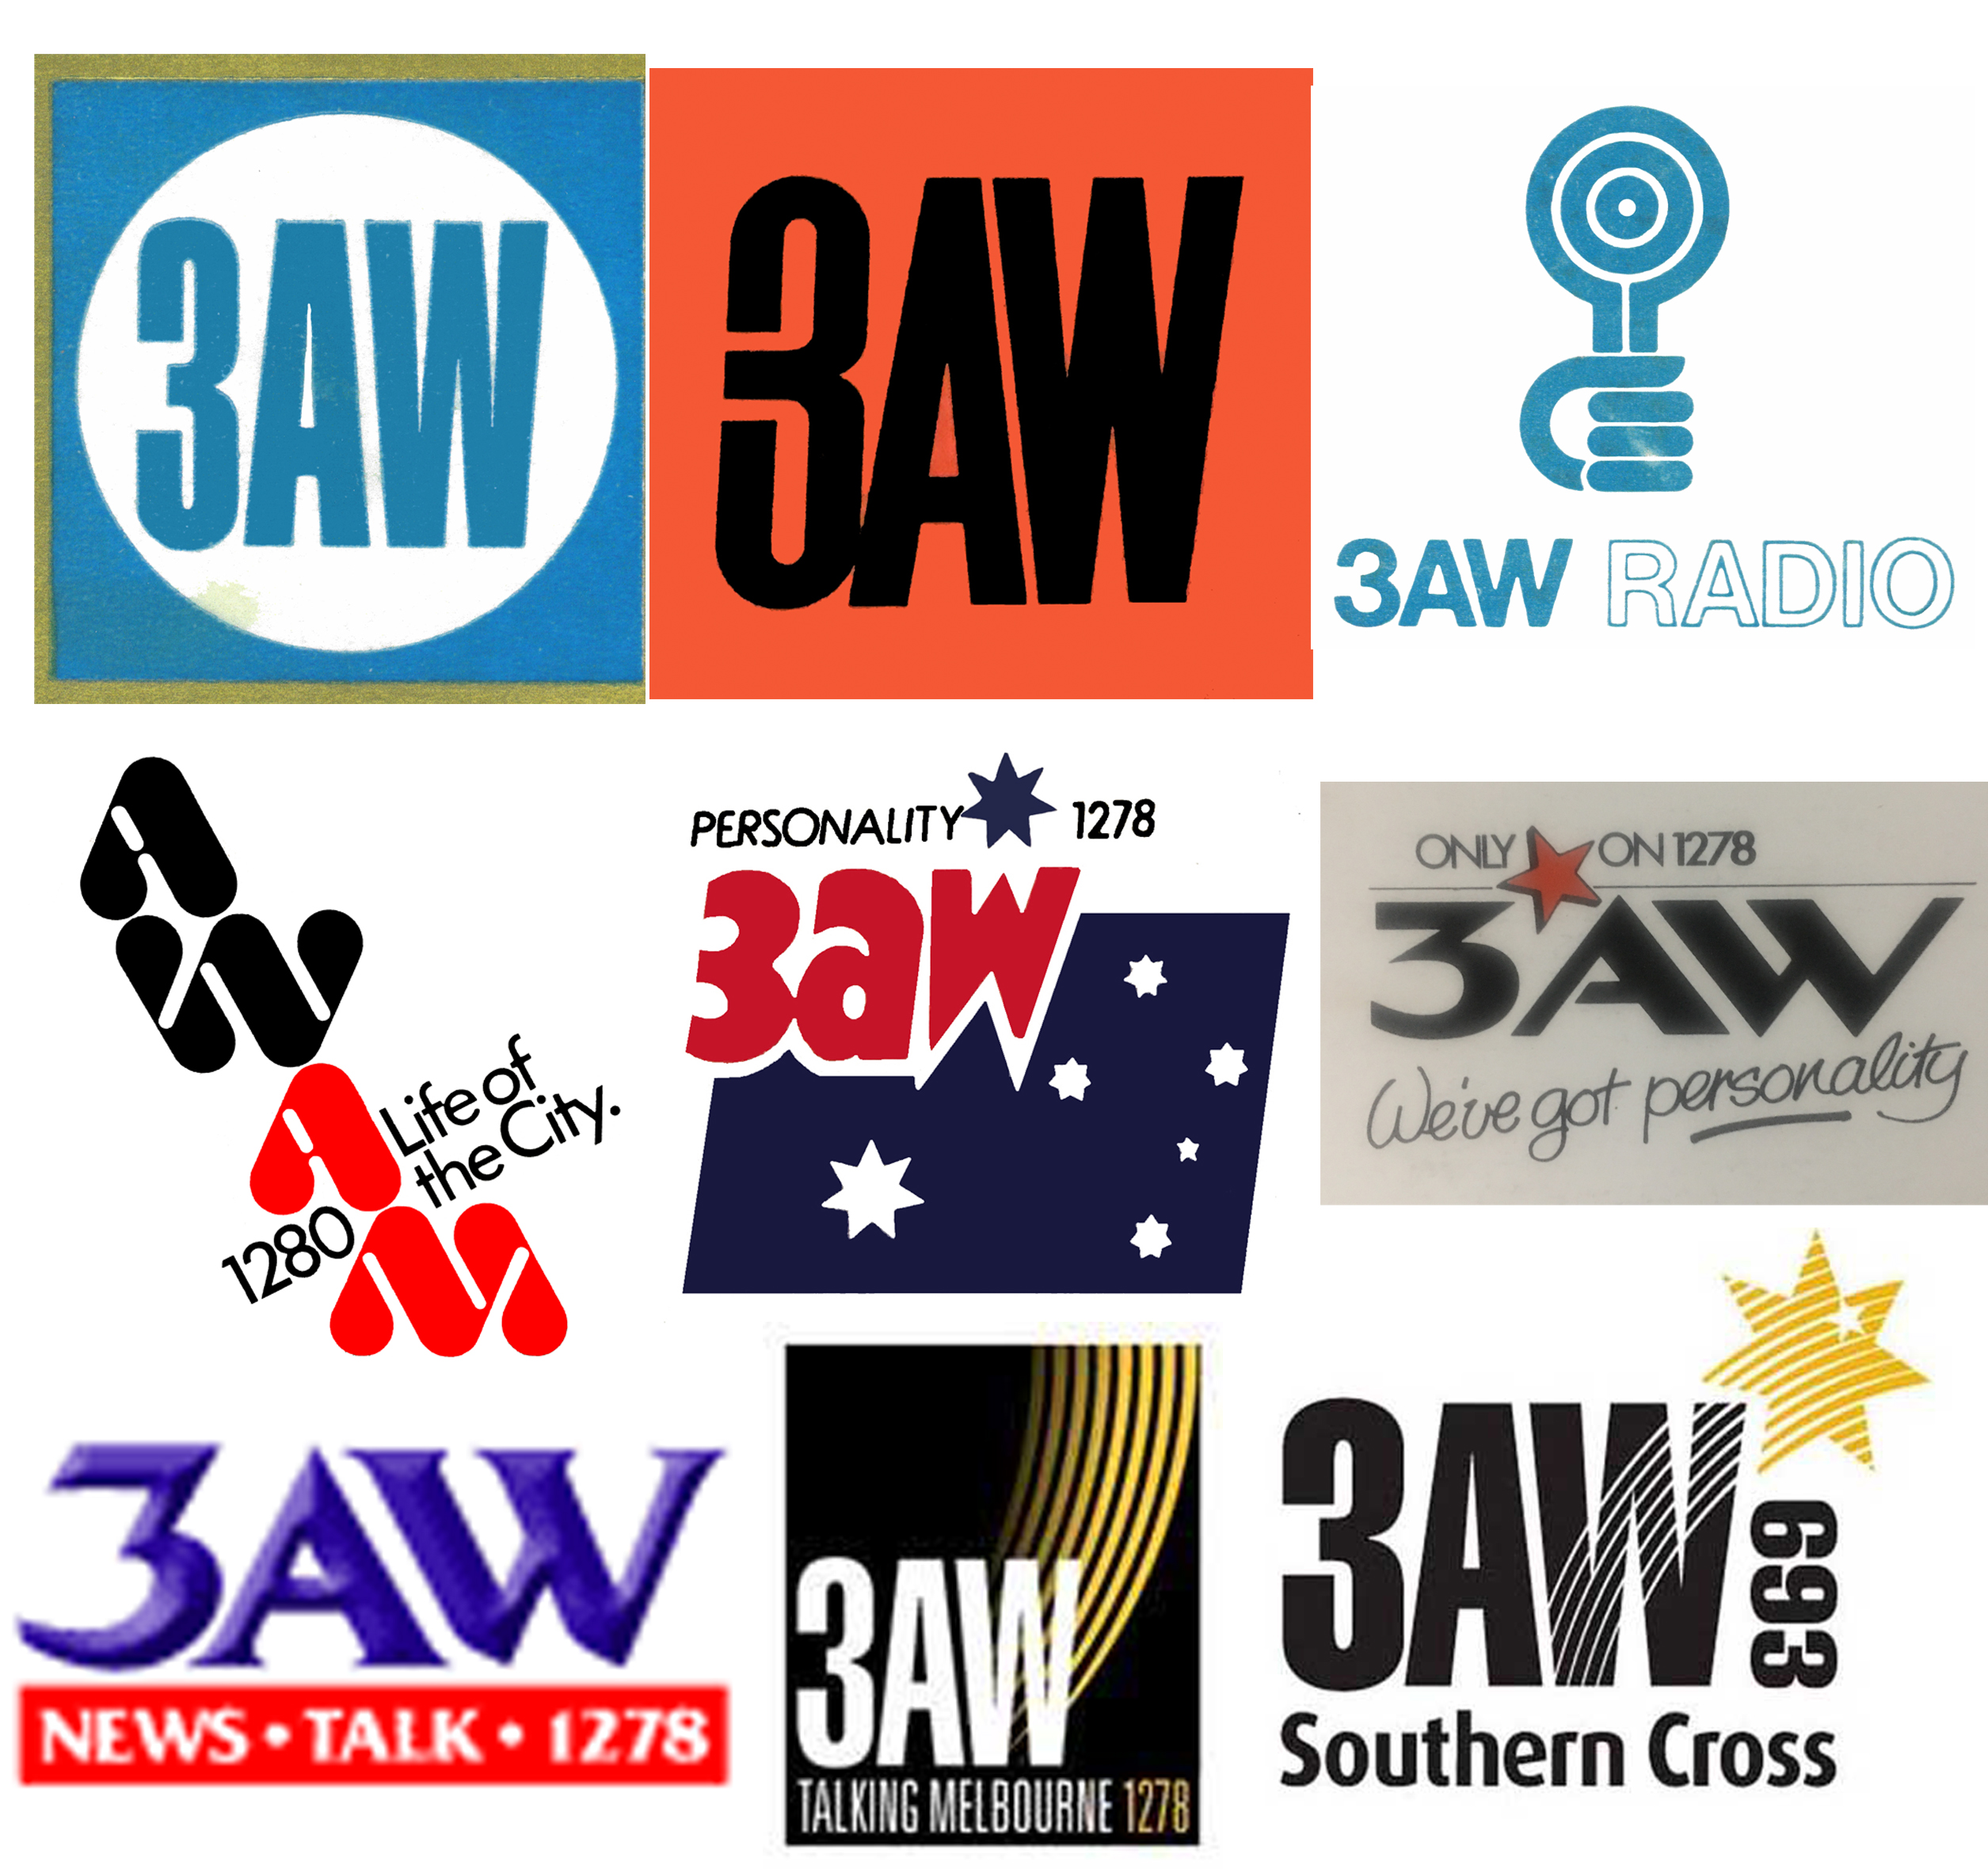 The 3AW Archive